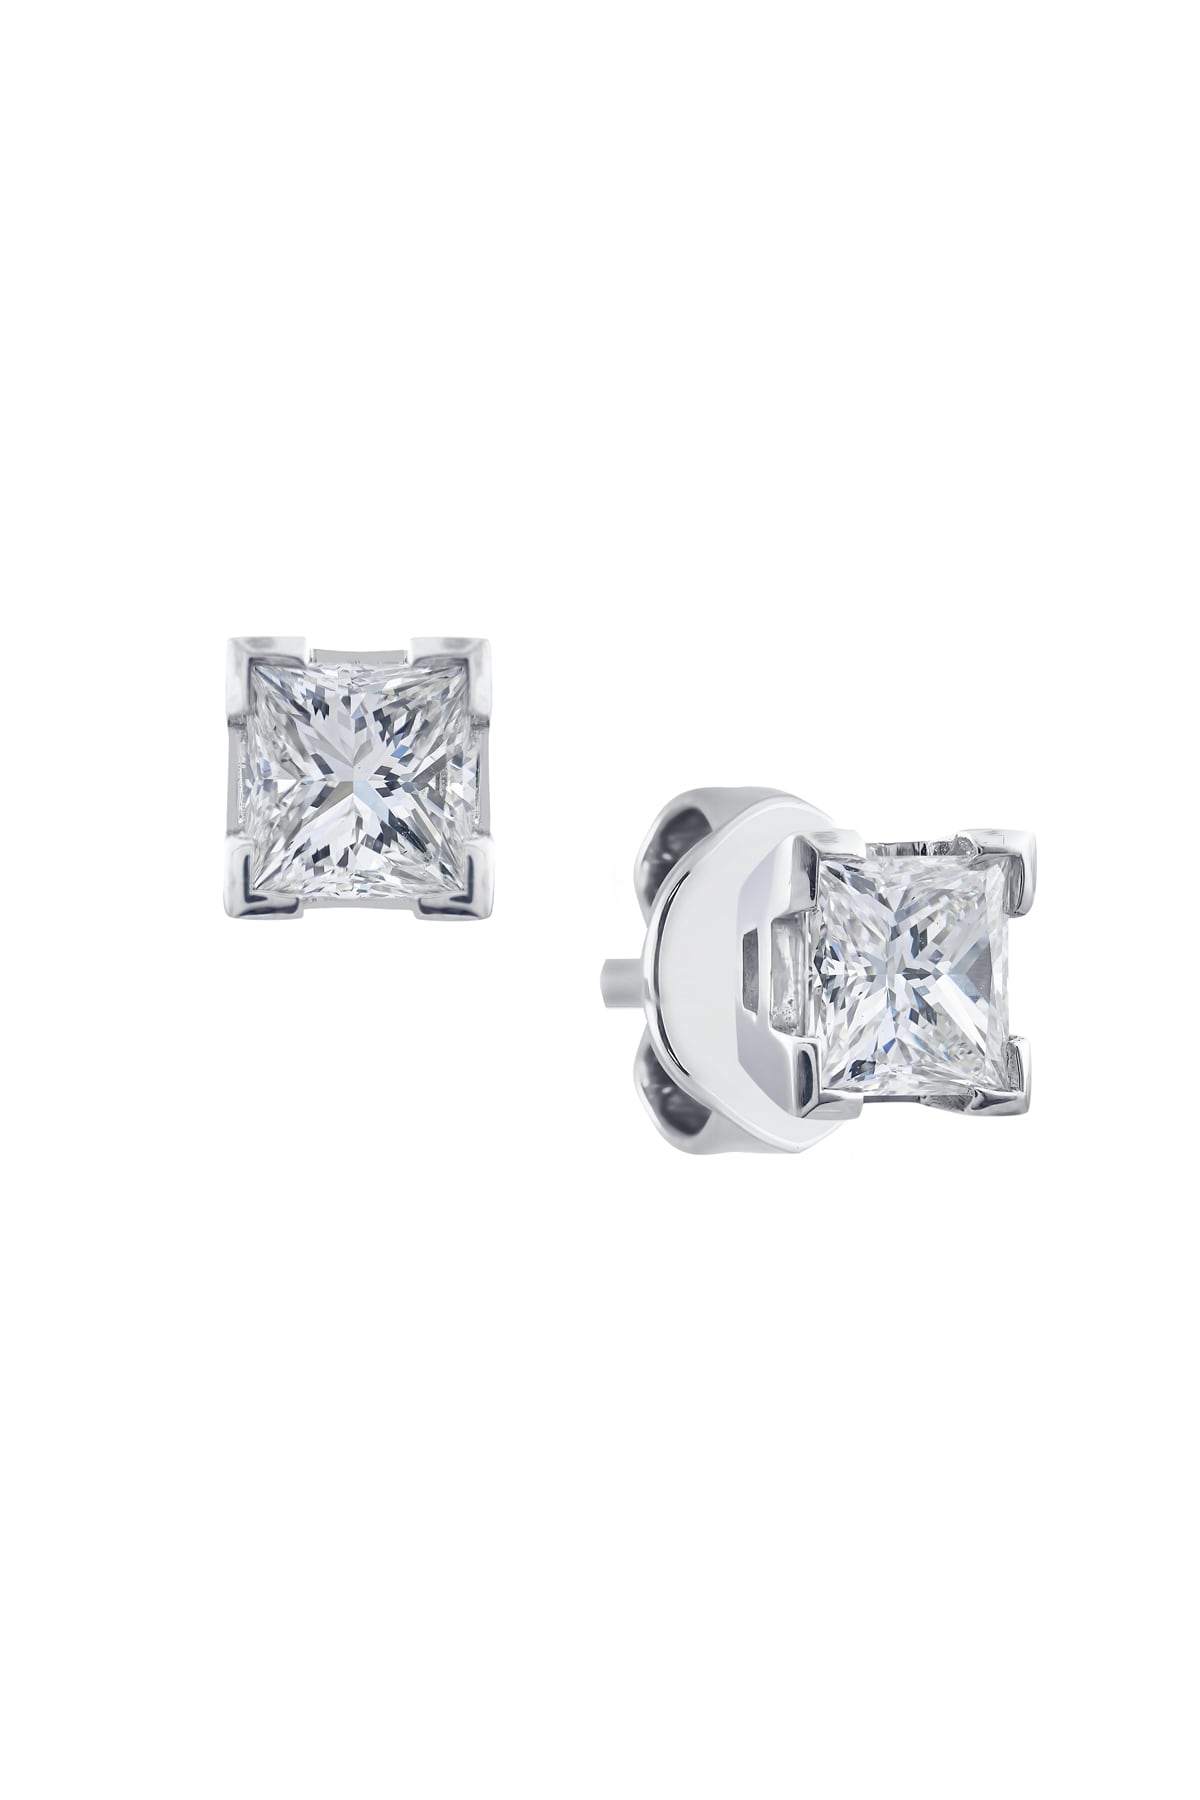 1ct Diamond Stud Earrings In White Gold from LeGassick.